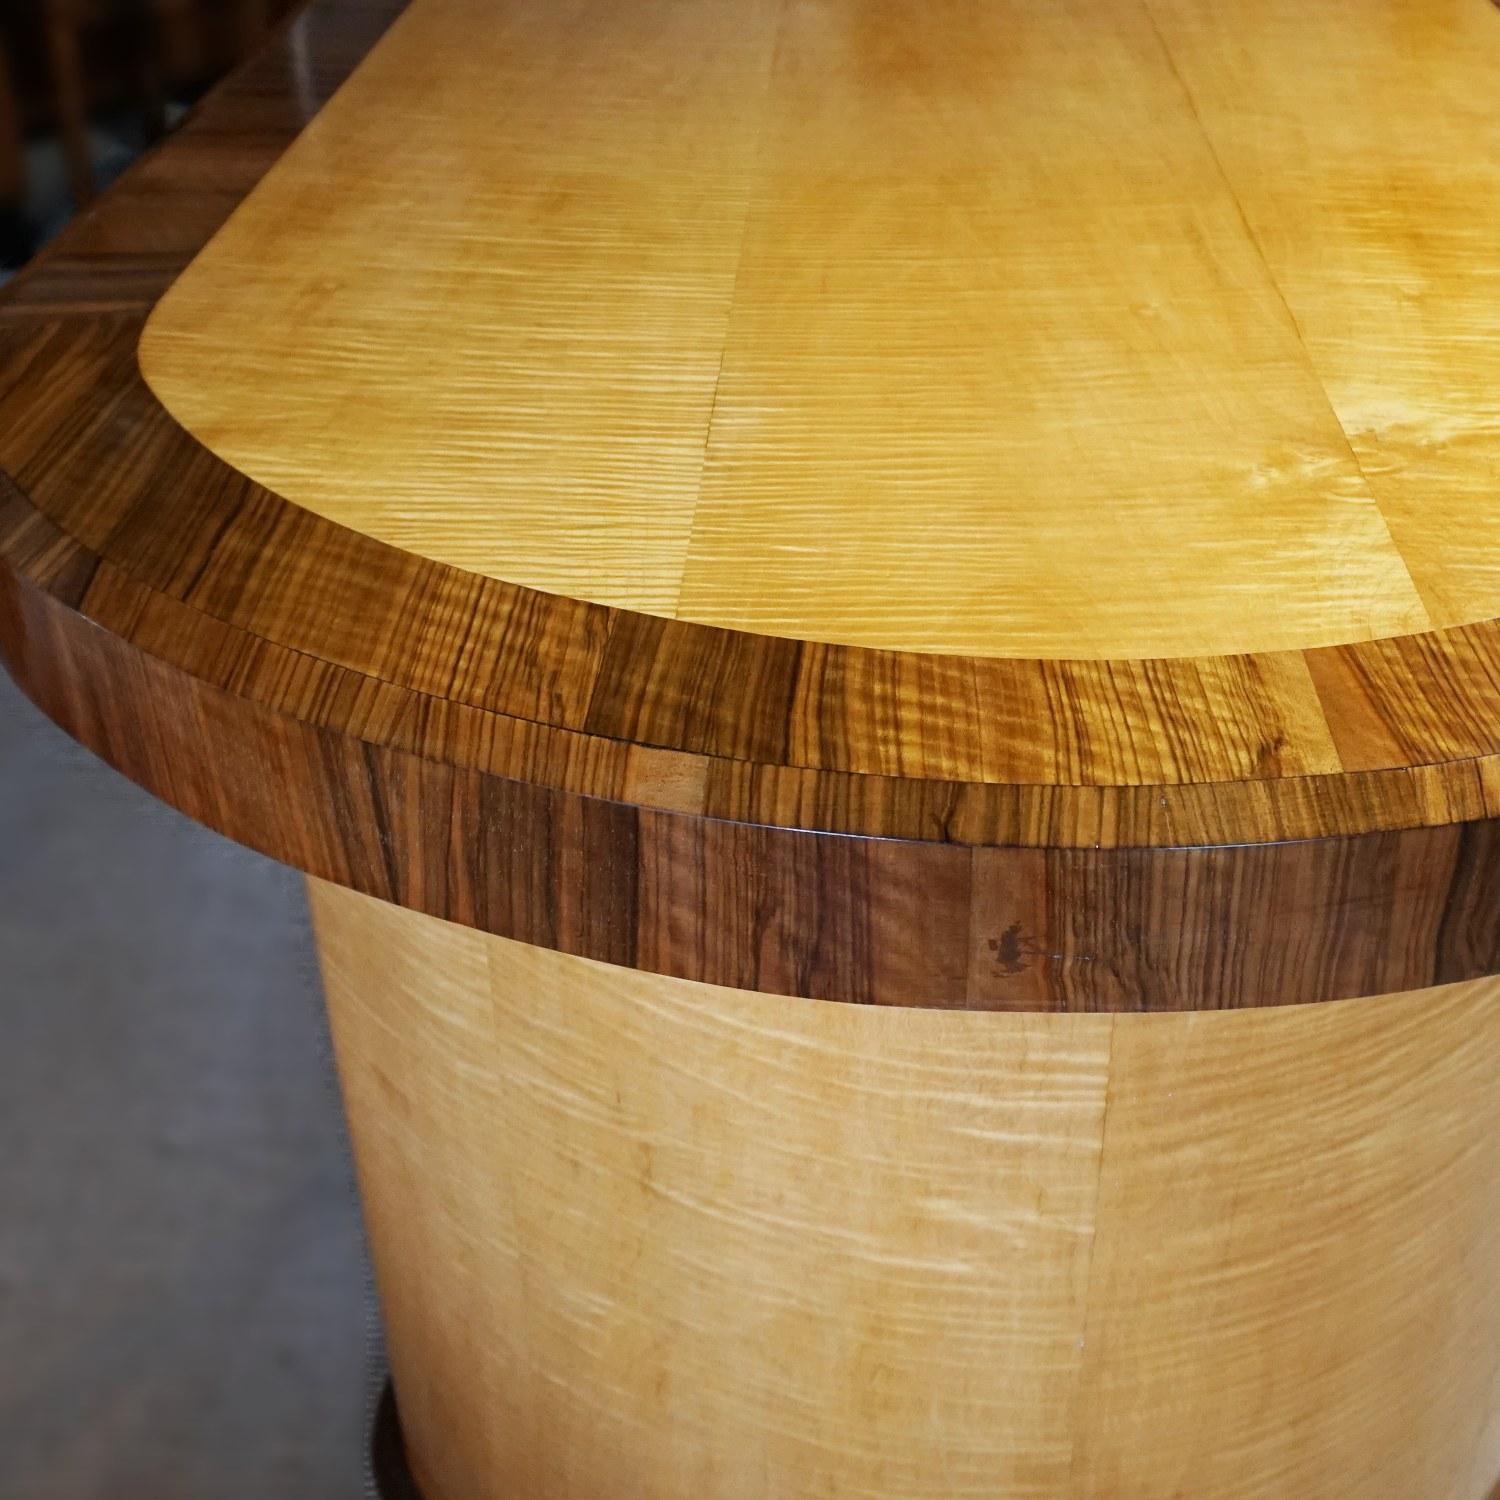 An Art Deco table with Satin Birch veneers and figured walnut banding. tabletop sits over two crescent shaped pedestals linked by a Satin Birch and walnut veneered stretcher. Veneered all round. This table can be used as a dining table, centre table